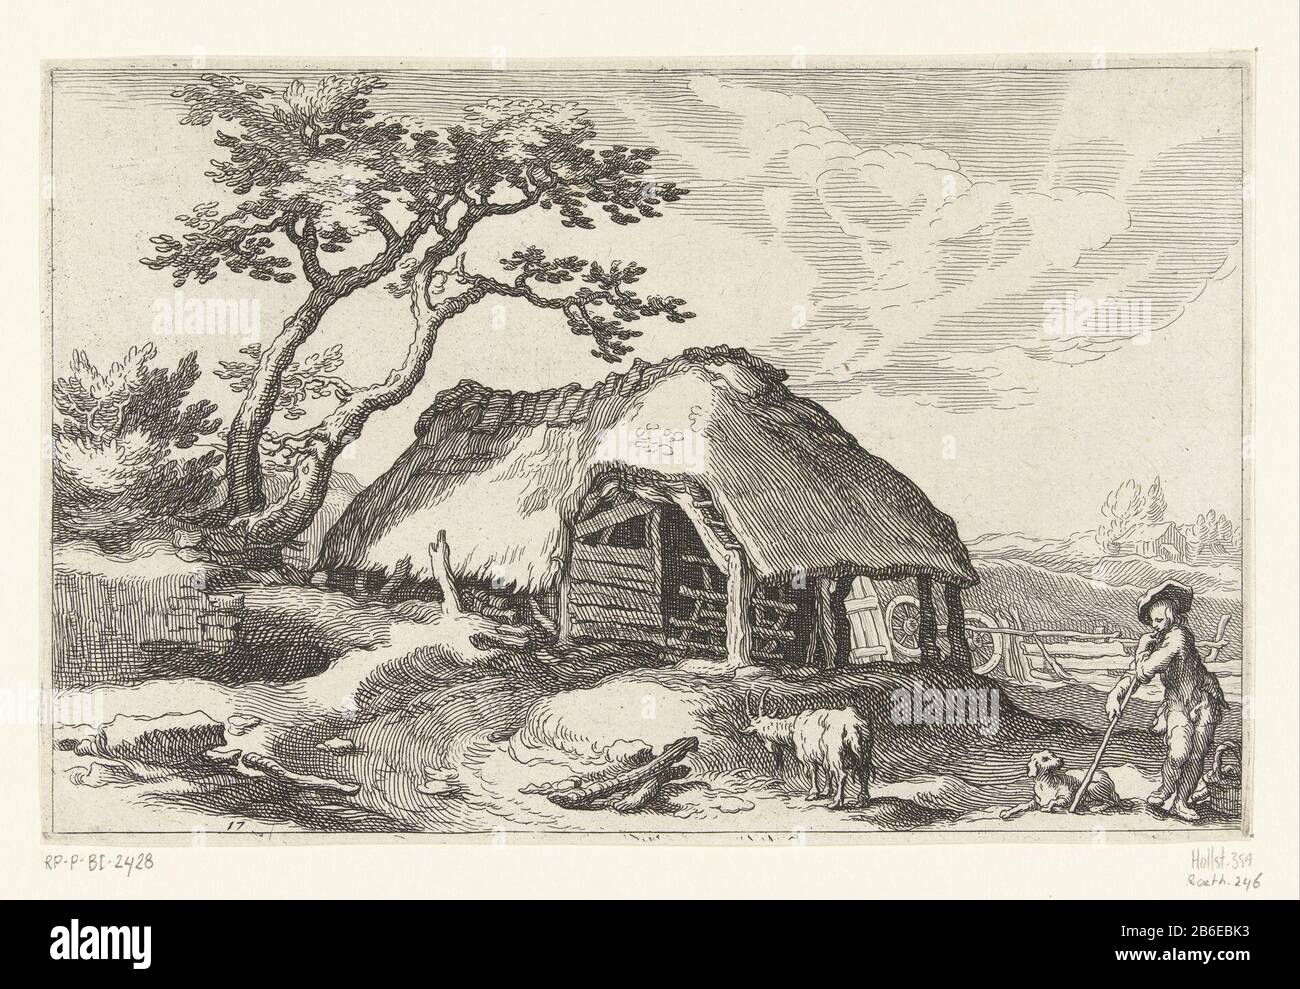 Farm and shepherd with dog and goat farms with Landscapes (series title) Farm and shepherd with dog and goat scenery with farms (series title) Property Type: print Serial number: 17 / 20Objectnummer: RP-P-BI 2428Catalogusreferentie: Hollstein Dutch 354Roethlisberger 246 Inscriptions / Brands: collector's mark, verso left, stamped: Lugt 240 Manufacturer : printmaker: Boëtius Adamsz. Bolswertnaar design: Abraham Bloemaert Place manufacture: Amsterdam Date: 1614 Physical features: etching material: paper Technique: etching Dimensions: sheet: H 153 mm × W 242 mmToelichtingPrent from series of twen Stock Photo